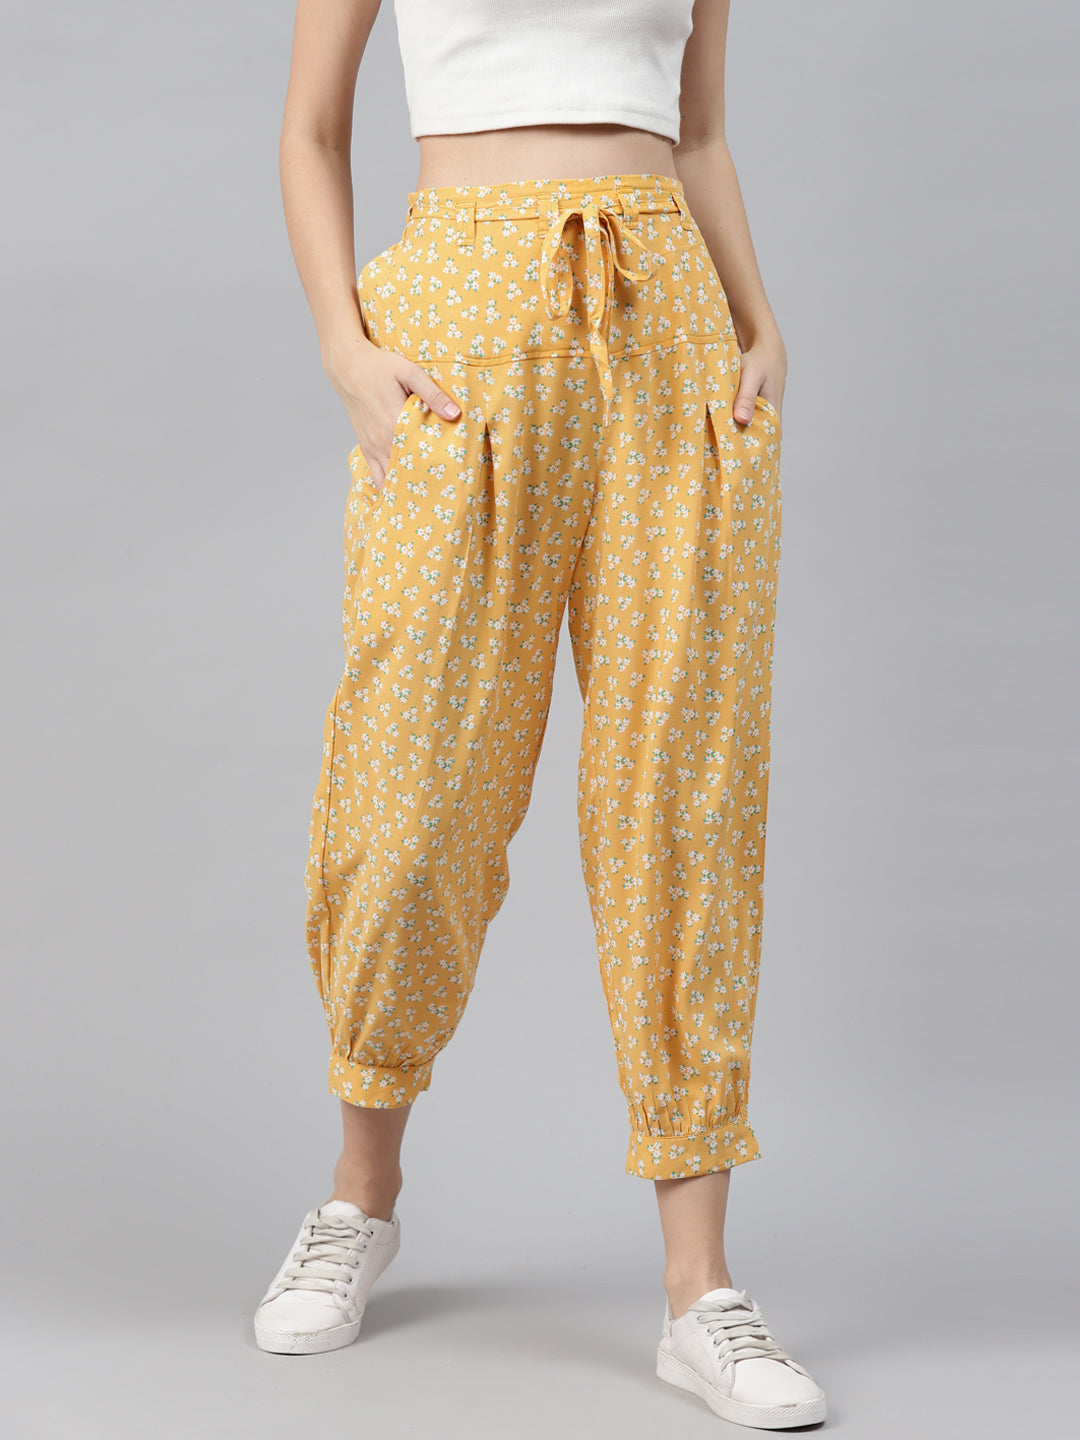 Yellow All Purpose Crop Pants With Smart Fit